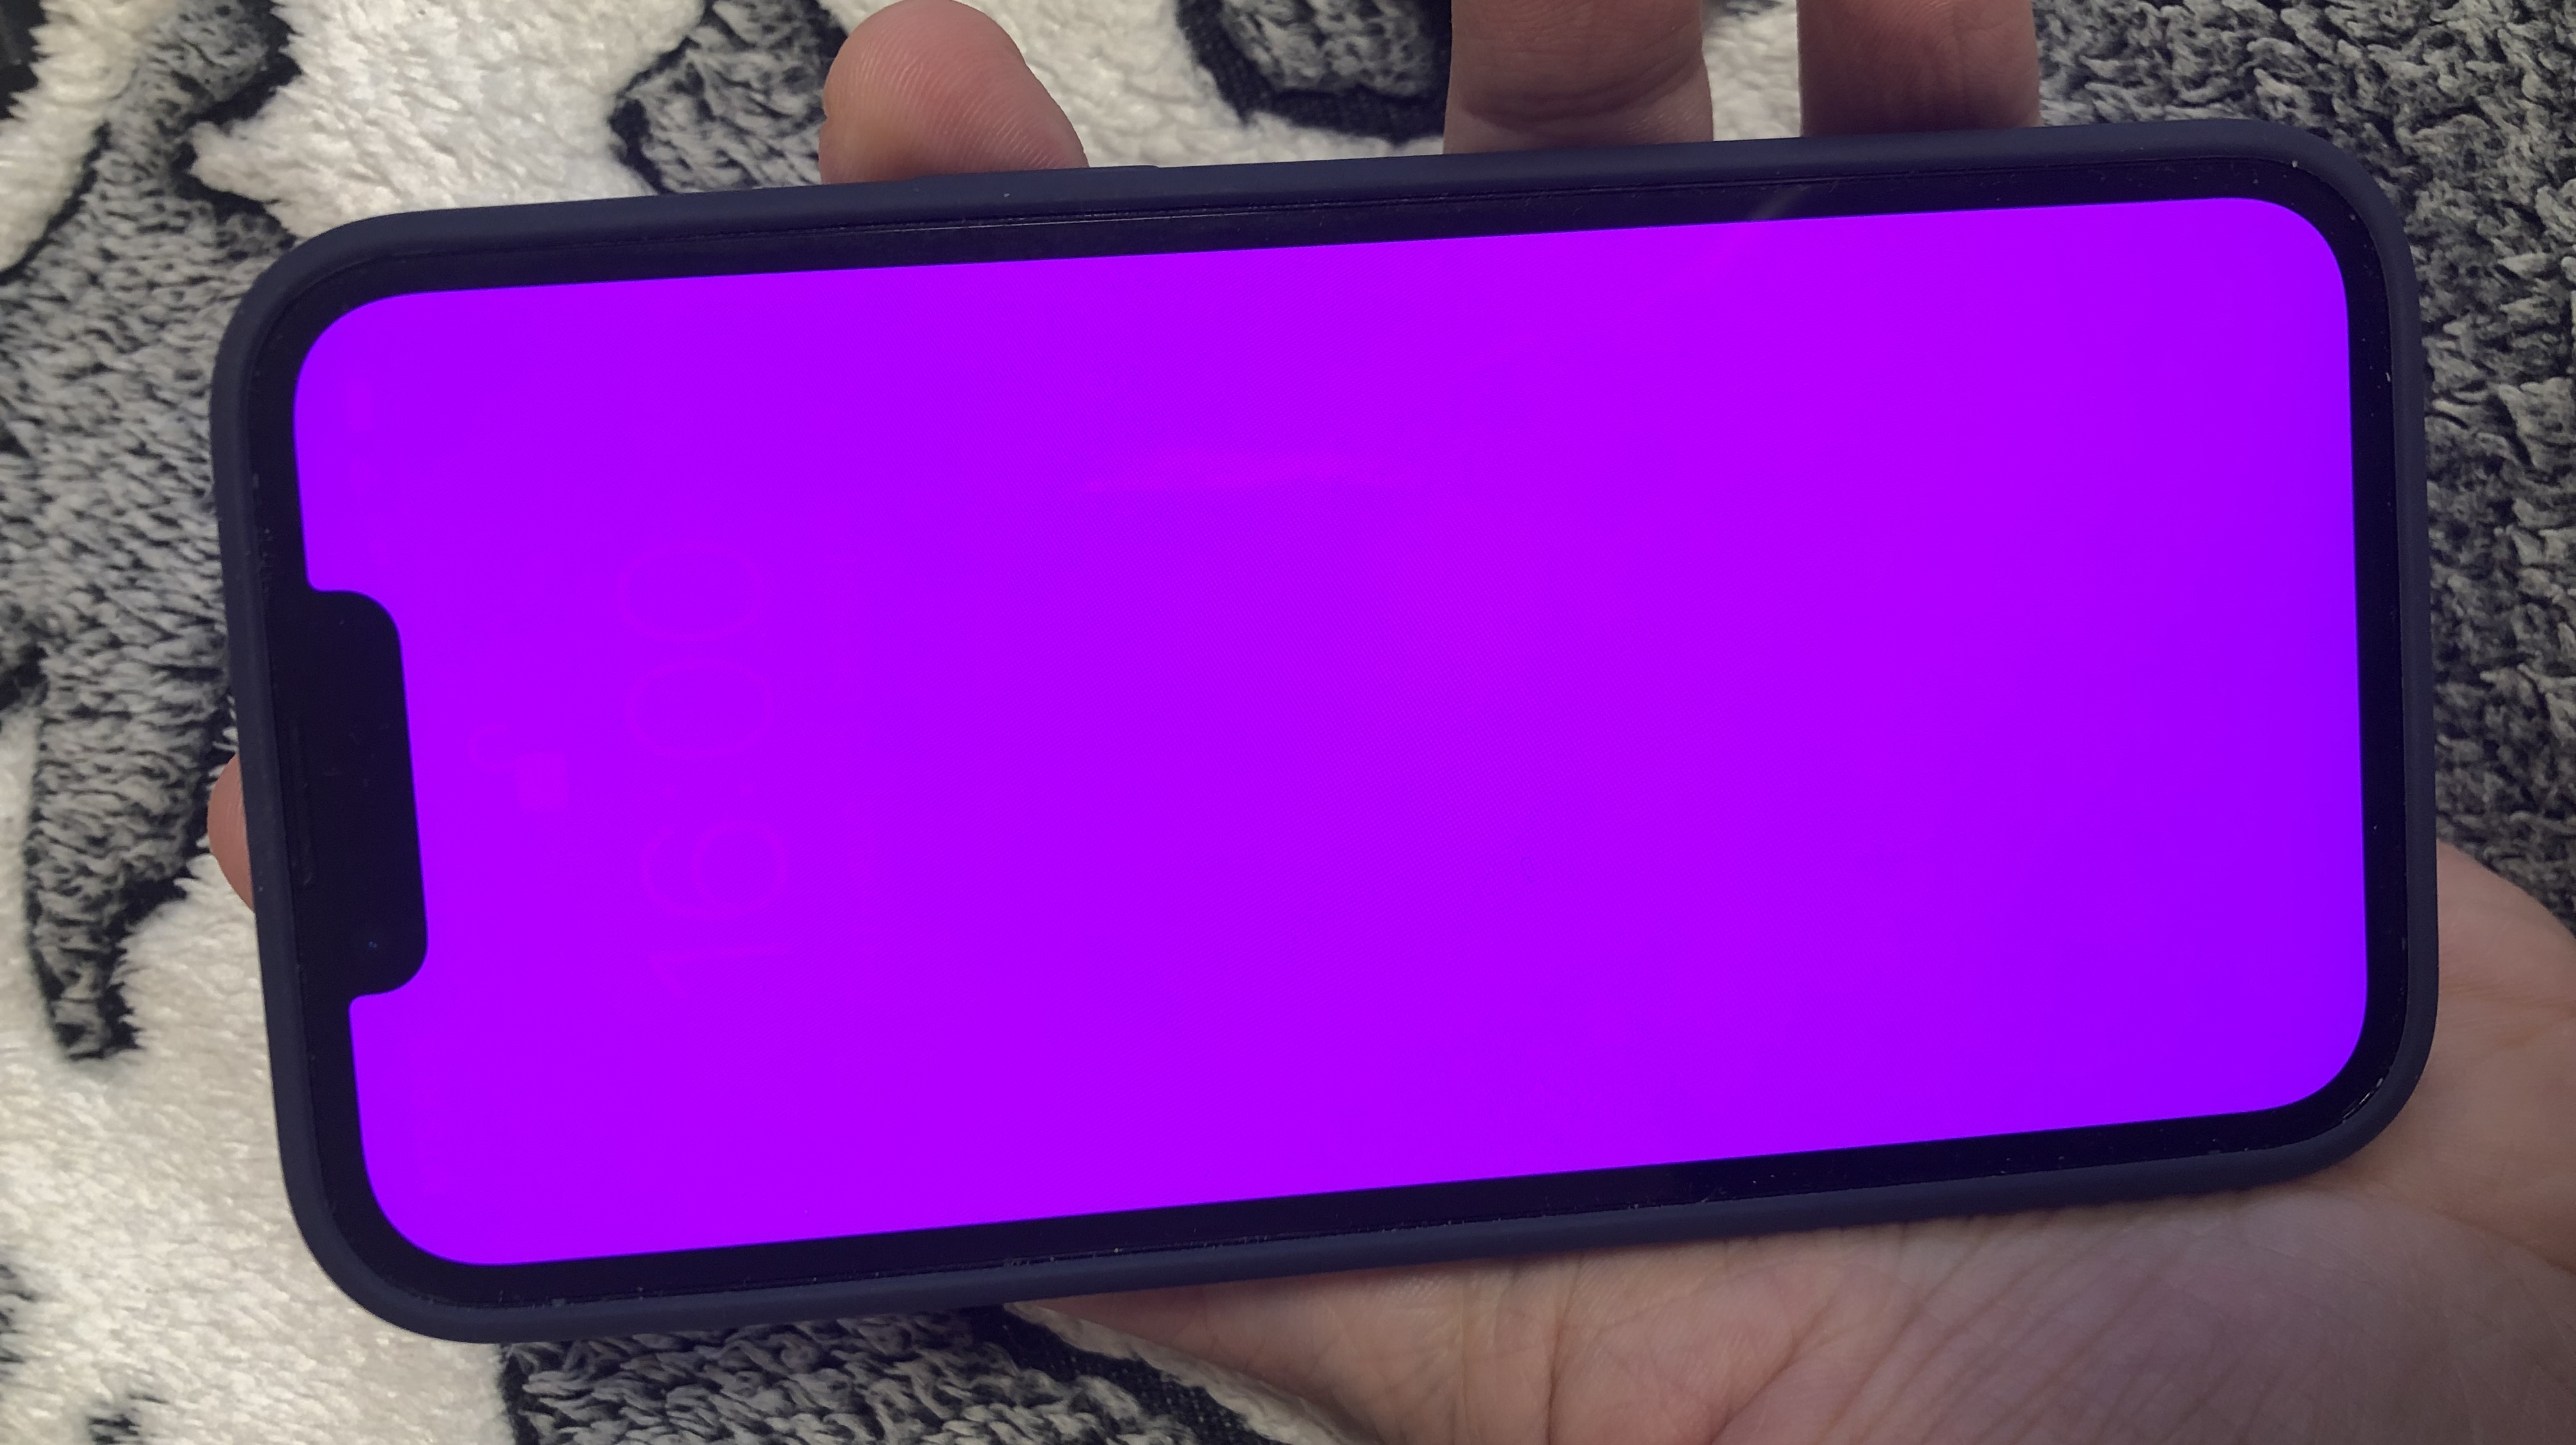 An iPhone 13 Pro with a pink screen